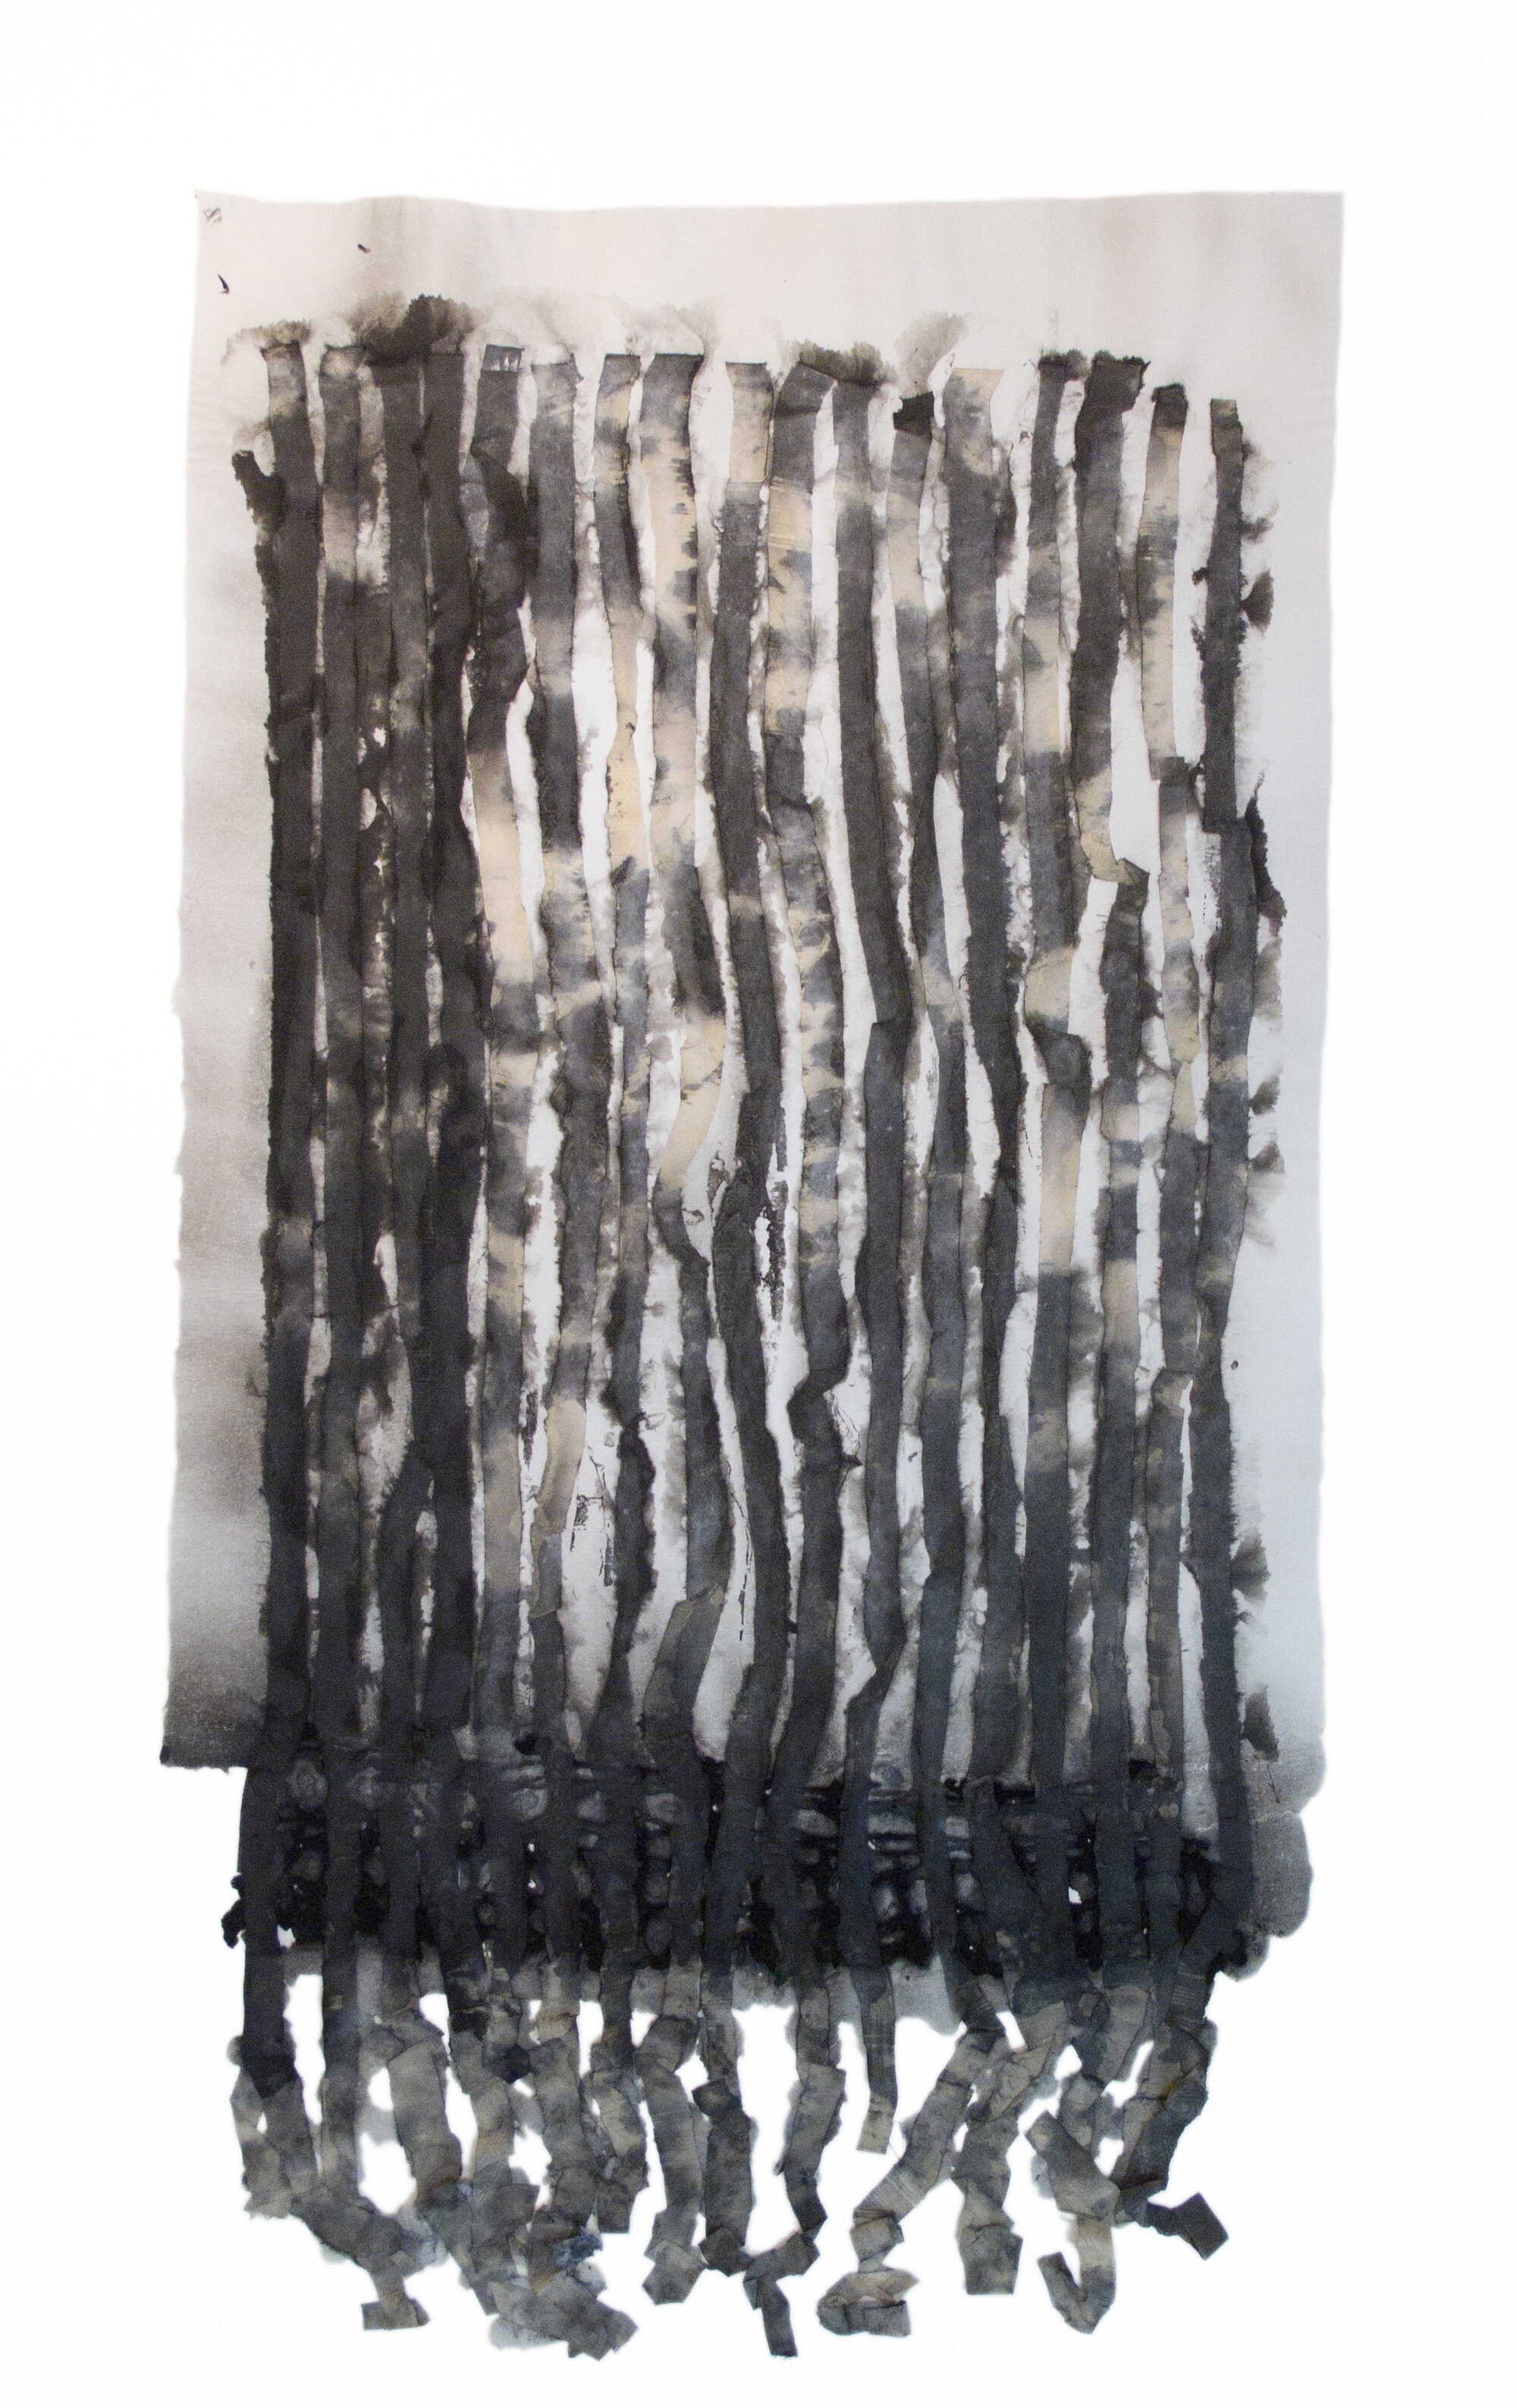   Untitled , 2013 Pigment, fabric, and linen handmade paper 41 x 21.5 in. 